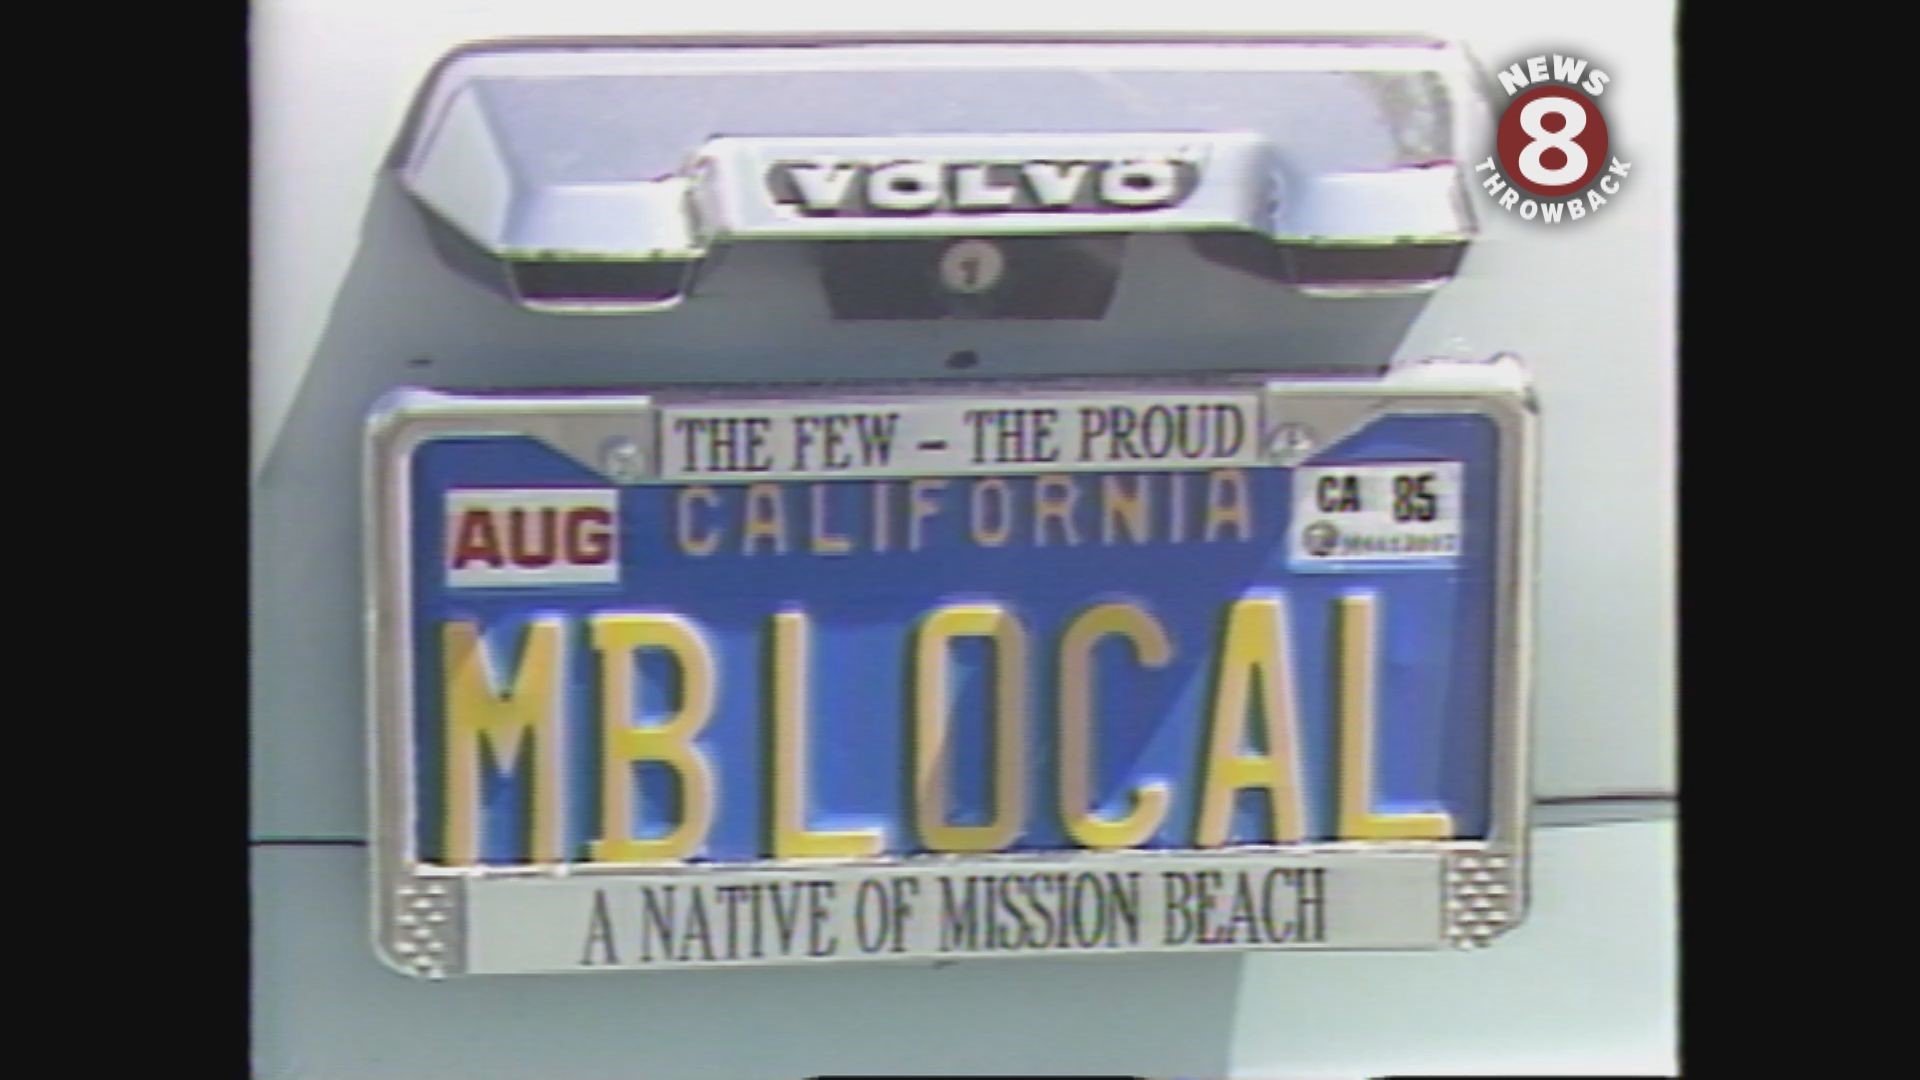 August 20, 1985
Reed Galin talks to people young and old living the good life in Mission Beach.